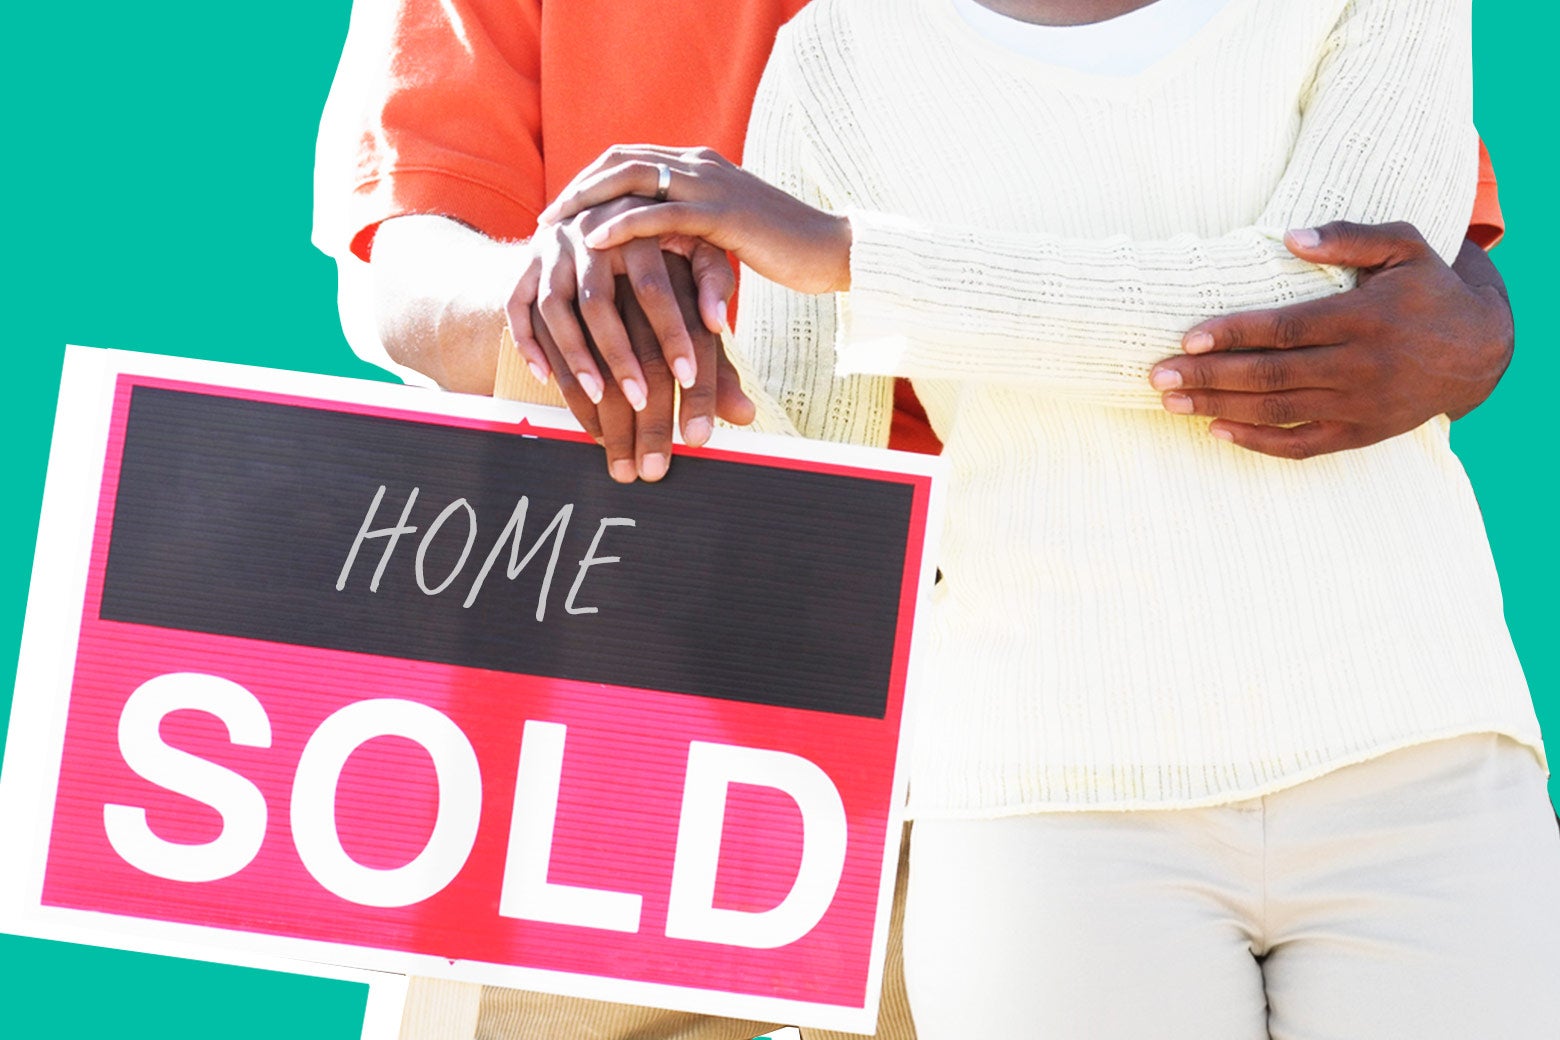 A black family with a home-sold sign.